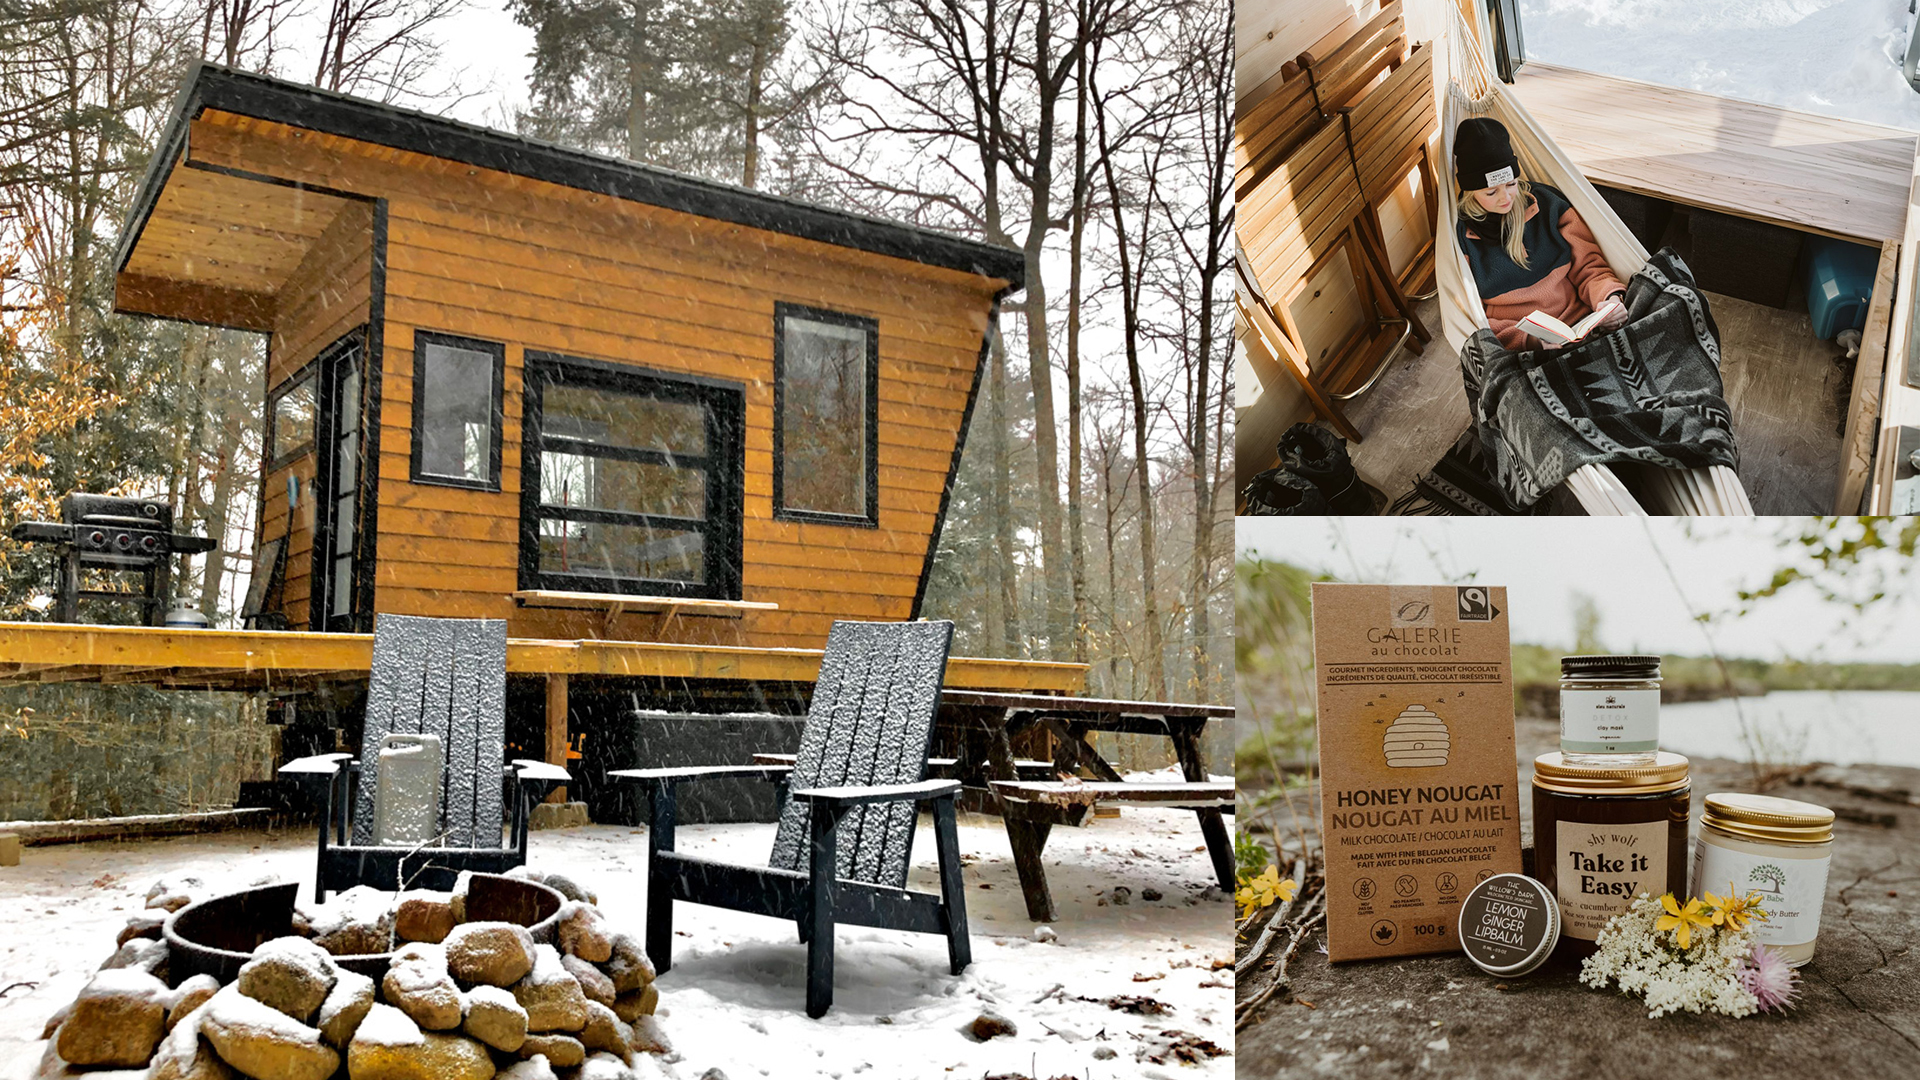 Cabinscape has a range of tiny cabins perfect for a winter getaway